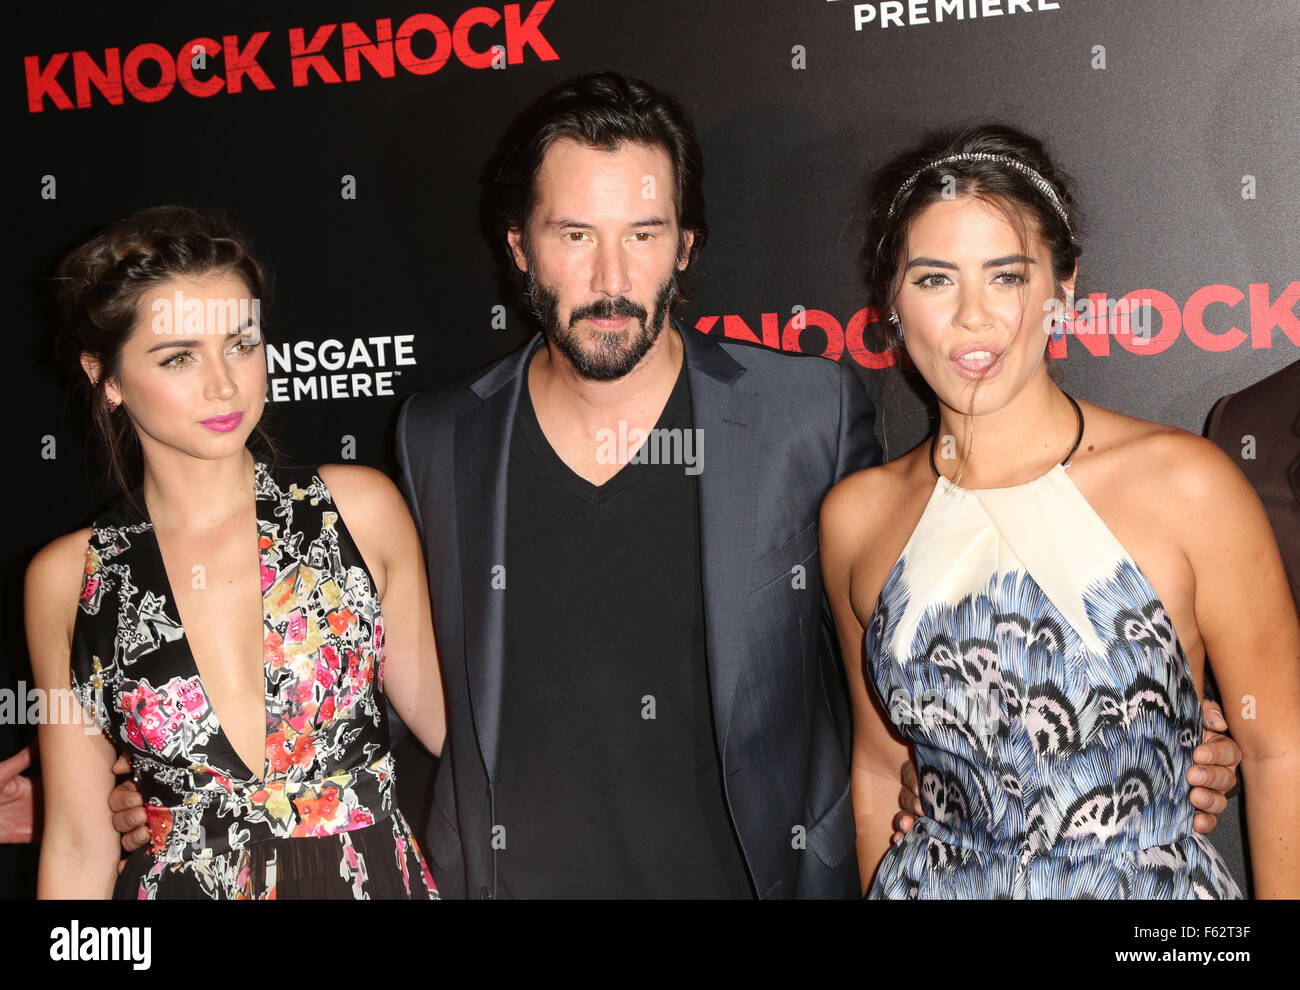 Premiere of Lionsgate's 'Knock Knock' at TCL Chinese 6 Theatres in Hollywood - Arrivals  Featuring: Ana de Armas, Keanu Reeves, Lorenza Izzo Where: Los Angeles, California, United States When: 07 Oct 2015 Stock Photo